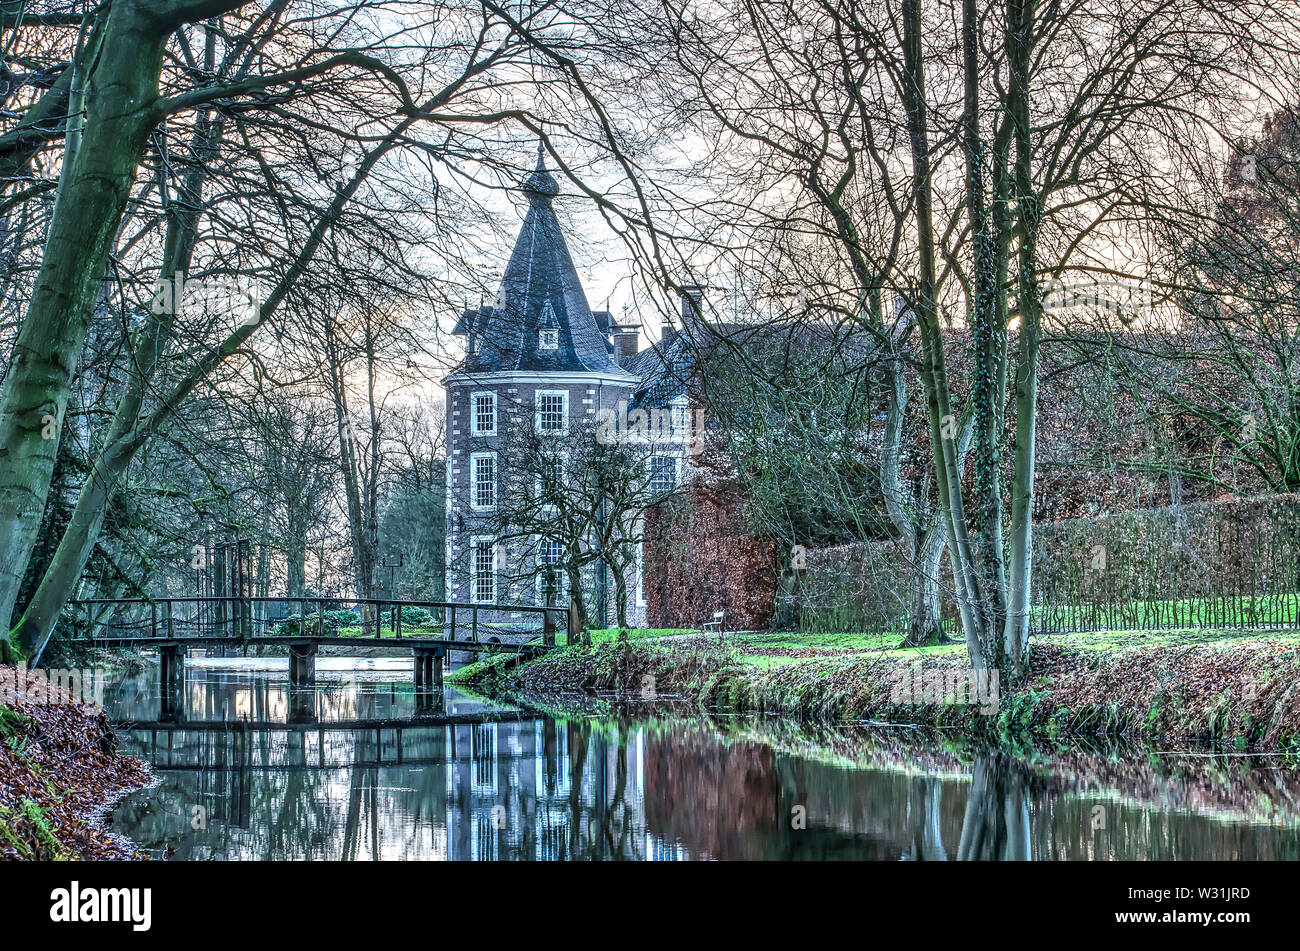 Heino, The Netherlands, December 12, 2017: part of Nijenhuis castle, nowadays in use as a museum, and the surrounding gardens and canals on a late aft Stock Photo